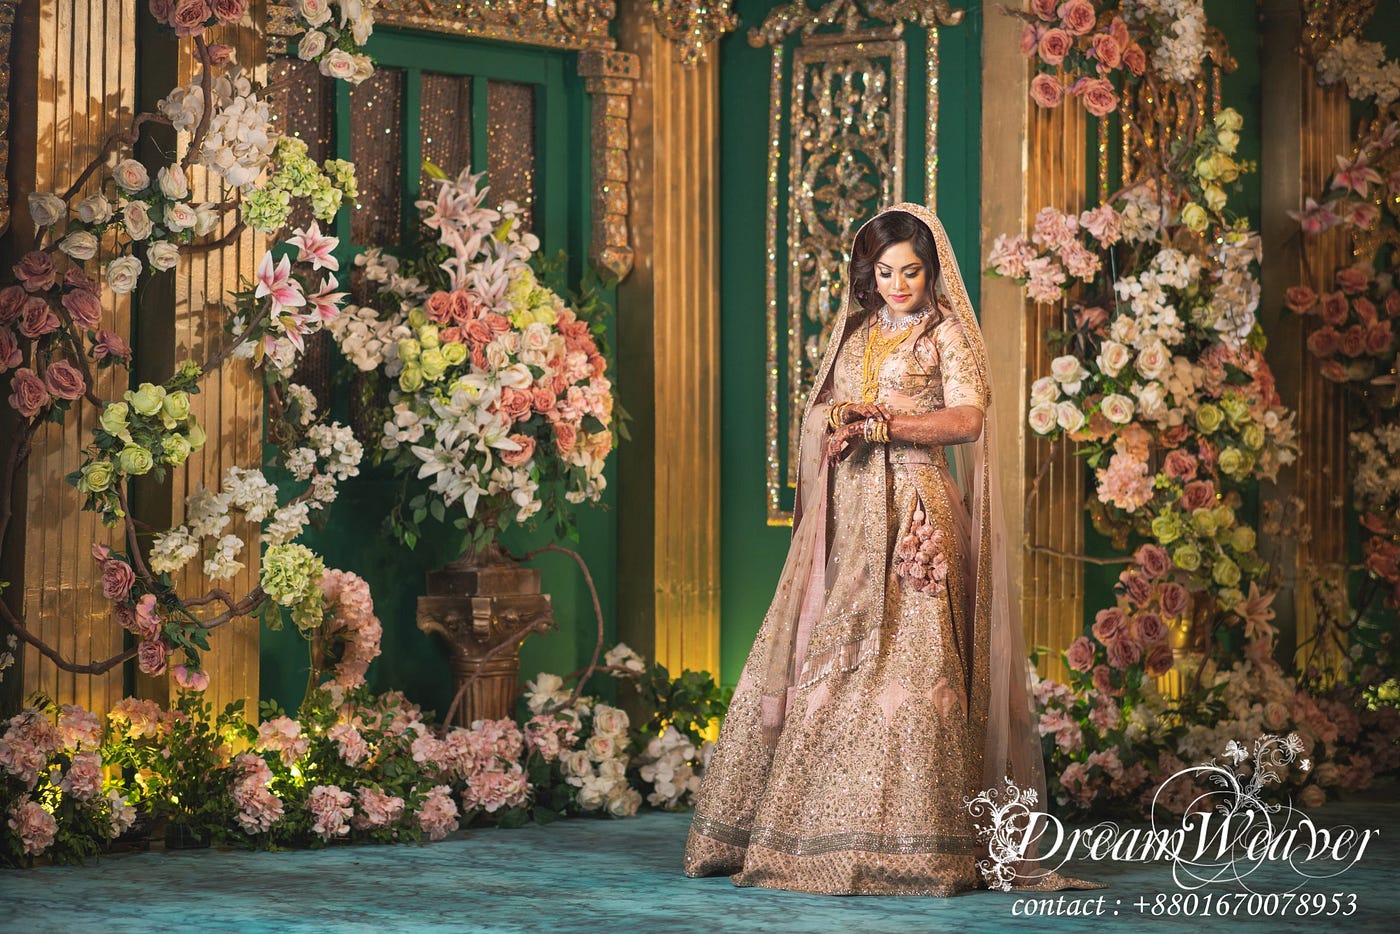 Royal Muslim Wedding With Pin Worthy Decor & The Couple In Sabyasachi  Outfits! — Wish N Wed, by Wish N Wed